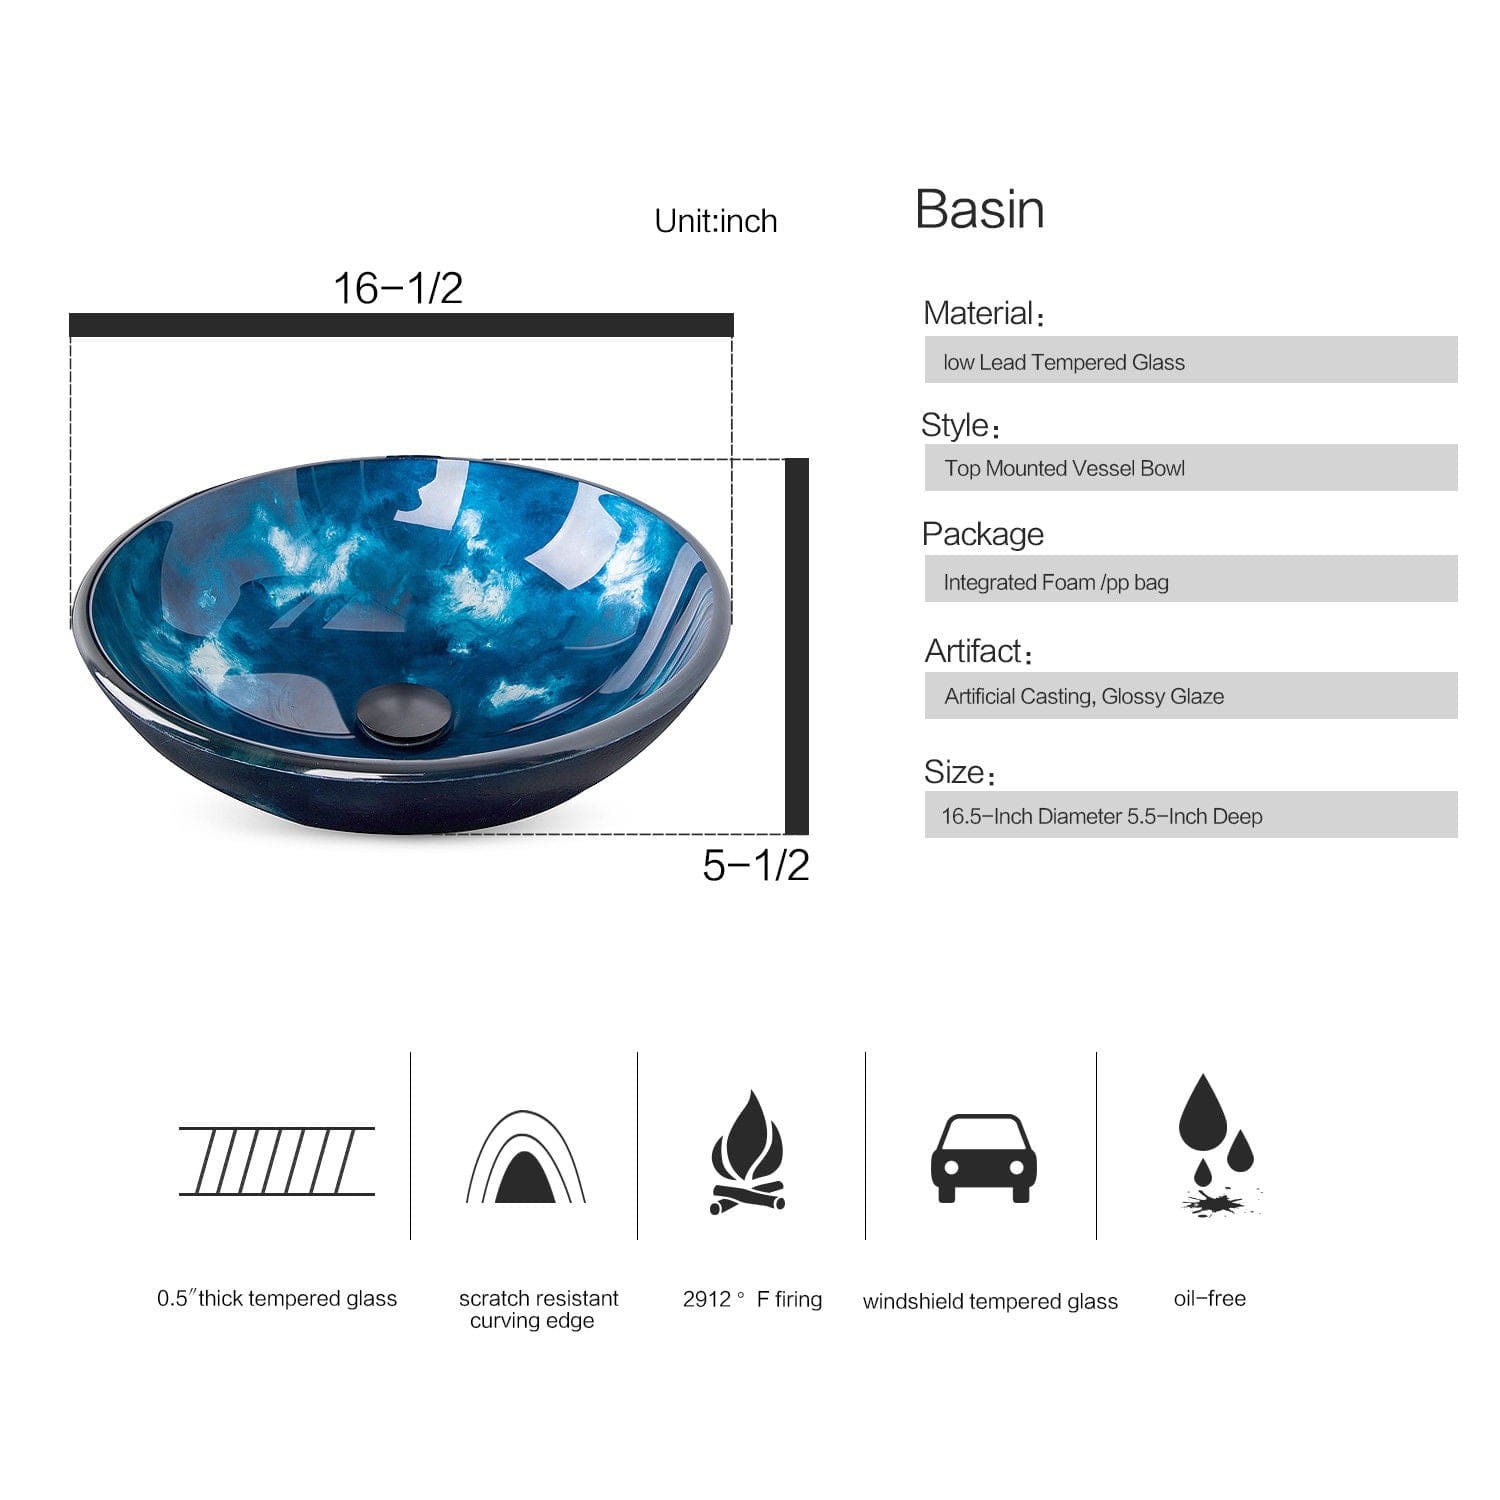 Elecwish Artistic Vessel Sink Bathroom Glass Bowl Faucet Drain Combo,Ocean Blue basin size and features